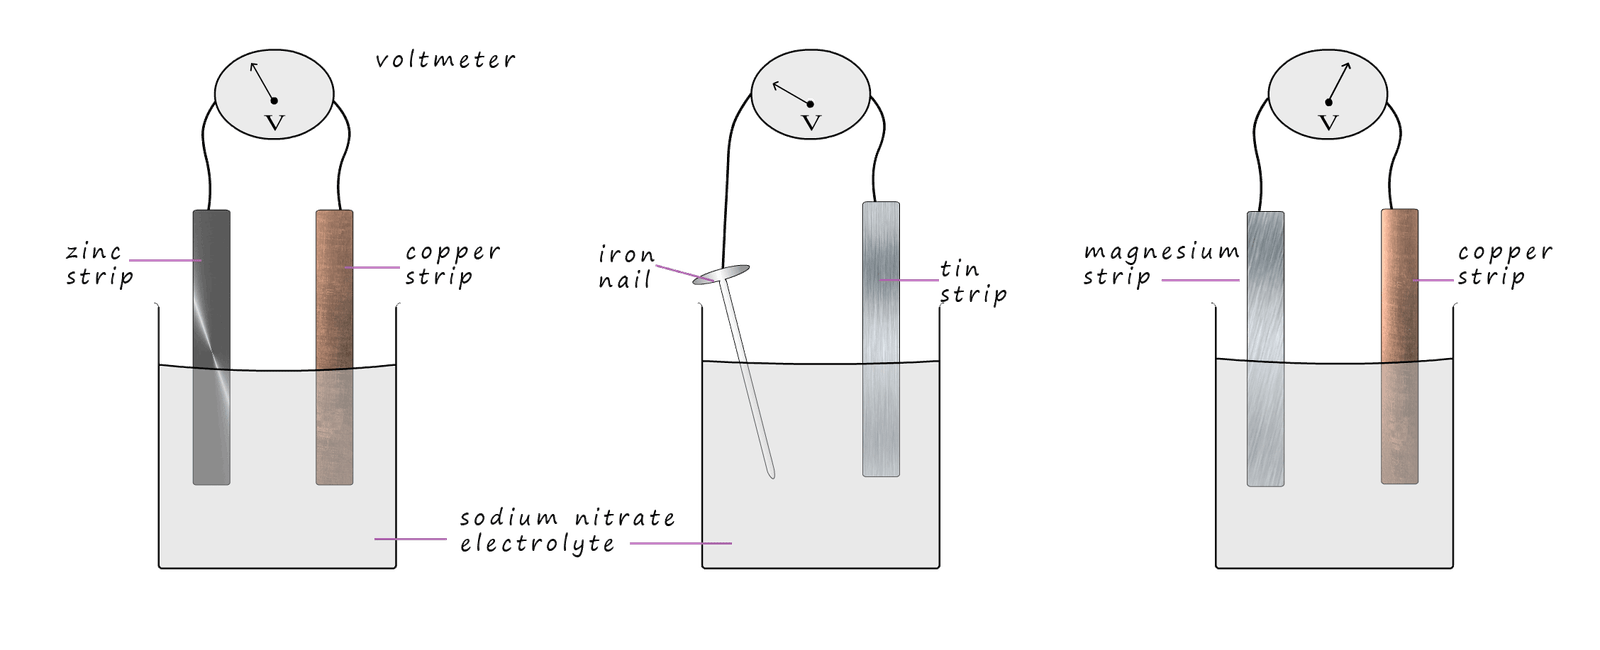 Diagram to show how to set up a simple electrical cell using two different metals and an electrolyte